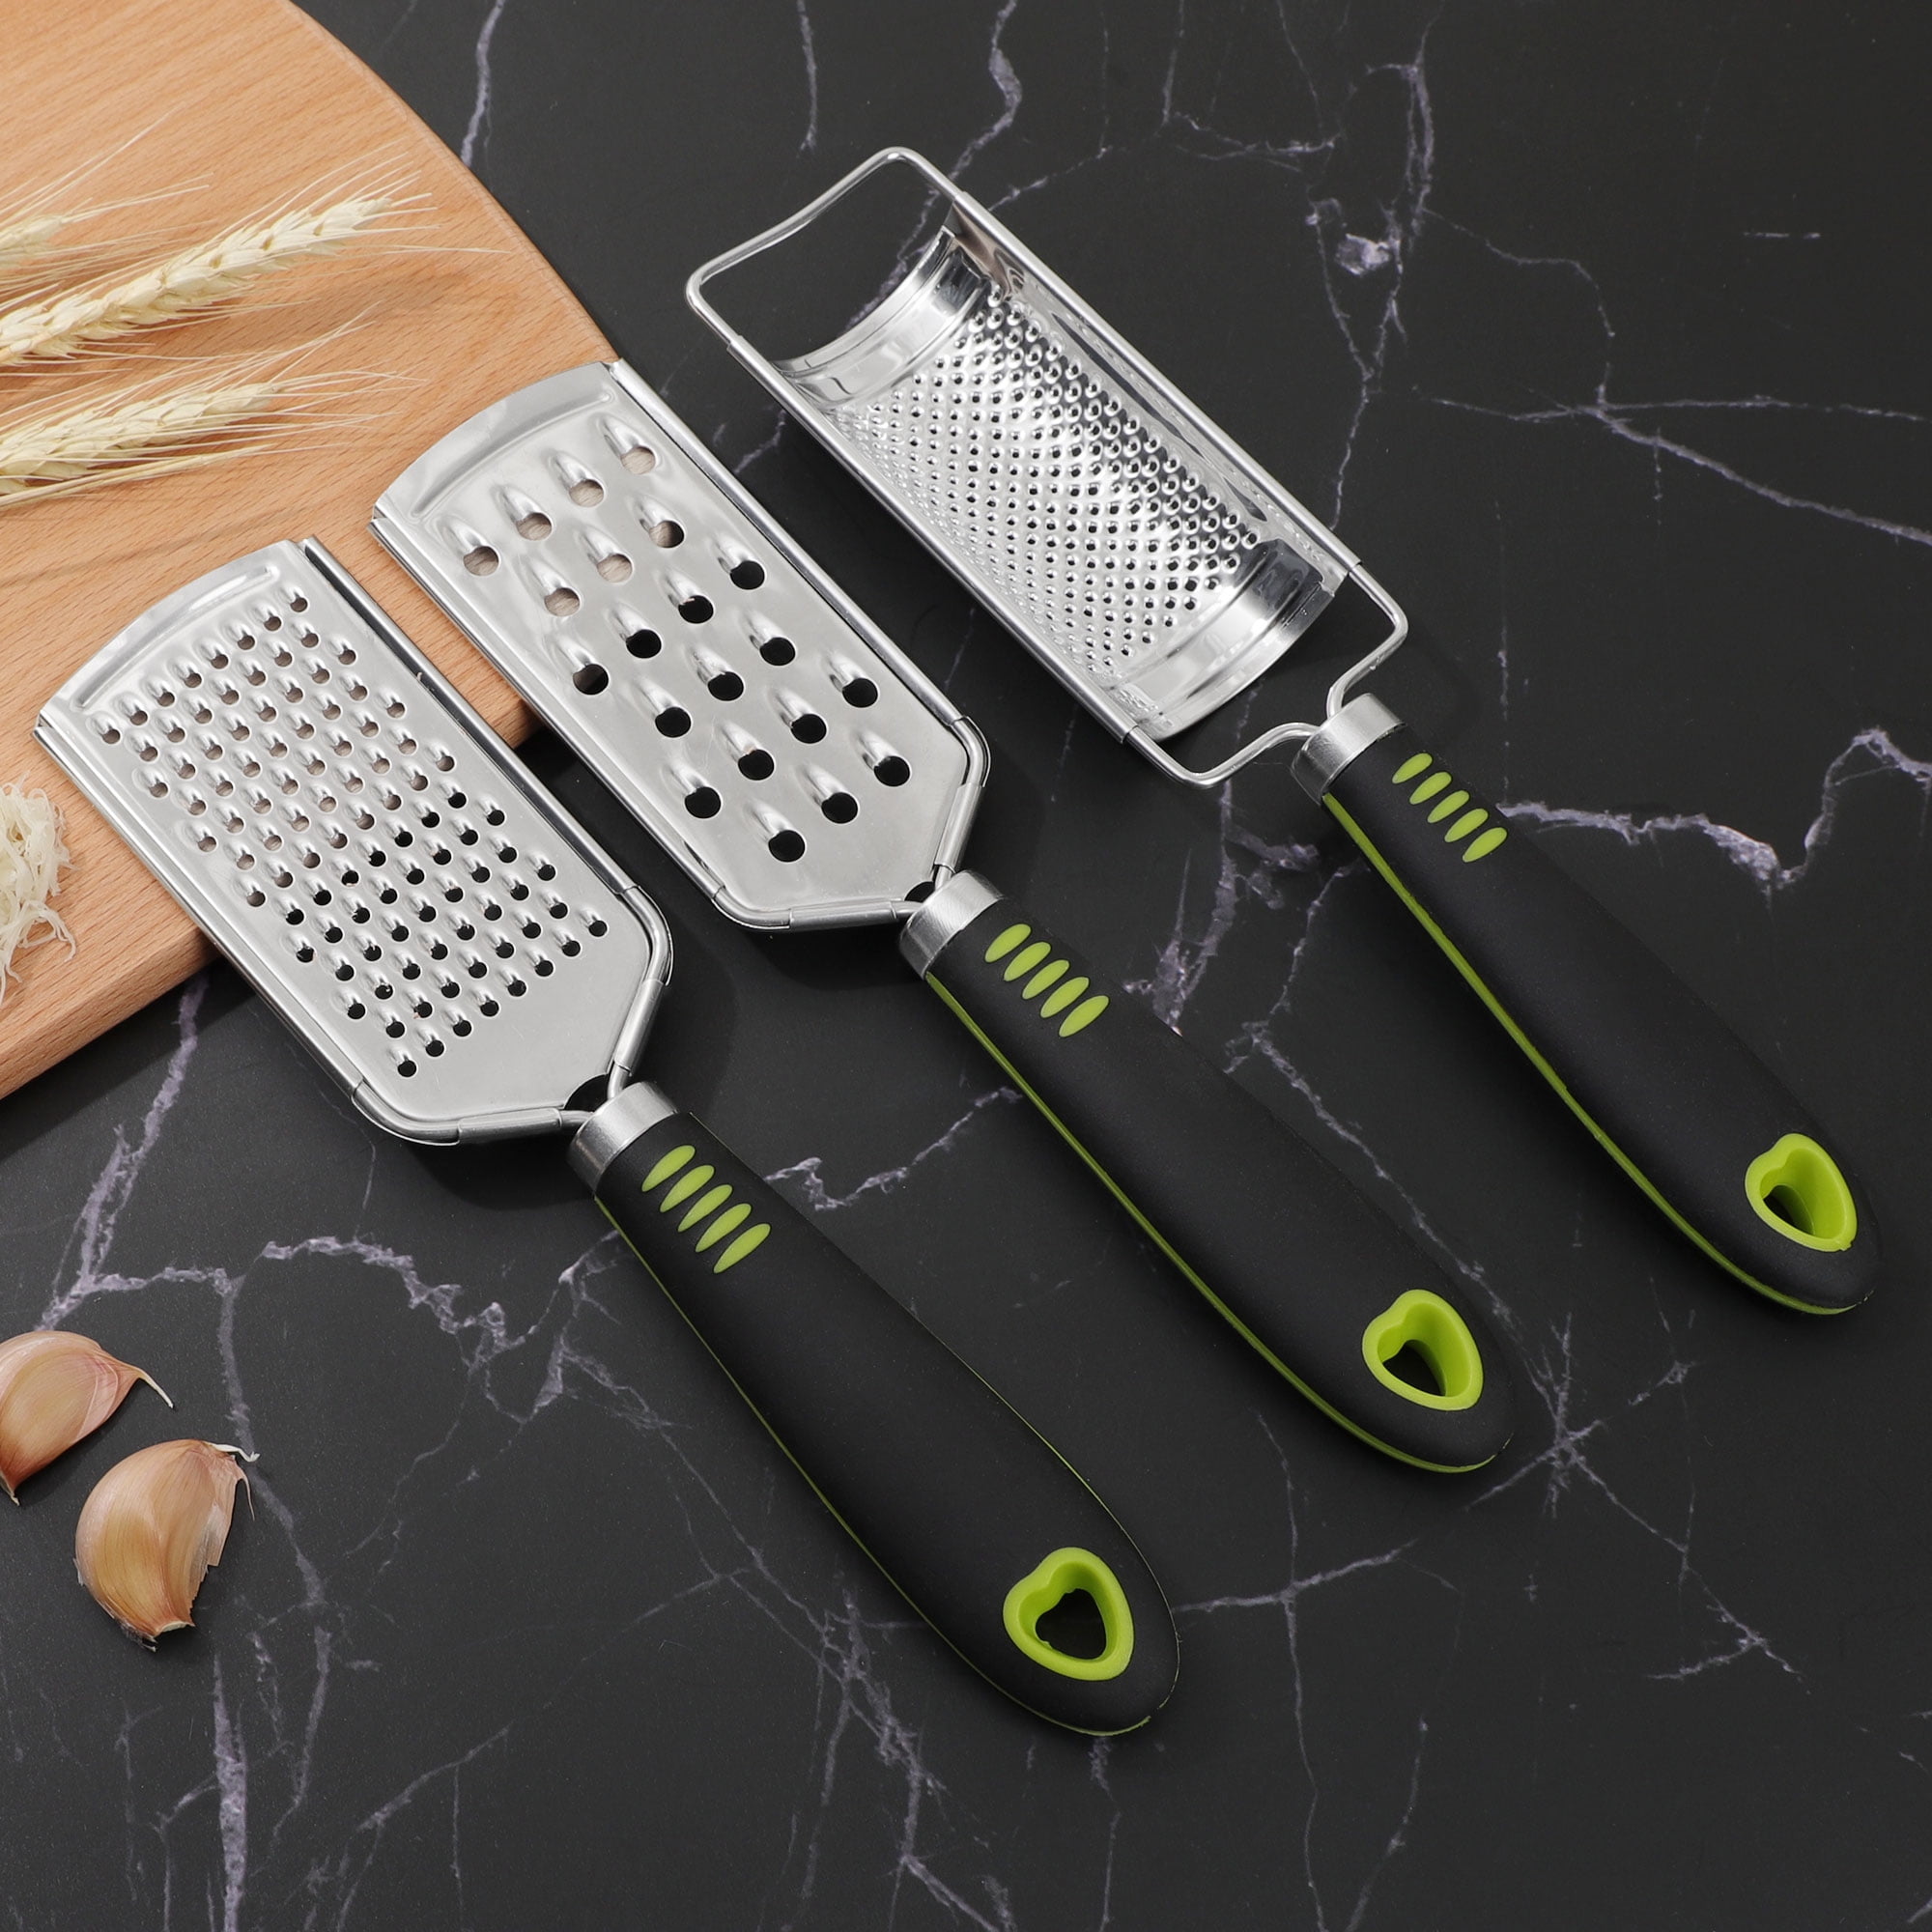 Classic Stainless Steel Zester and Cheese Grater - Day of the Dead Limited  Edition